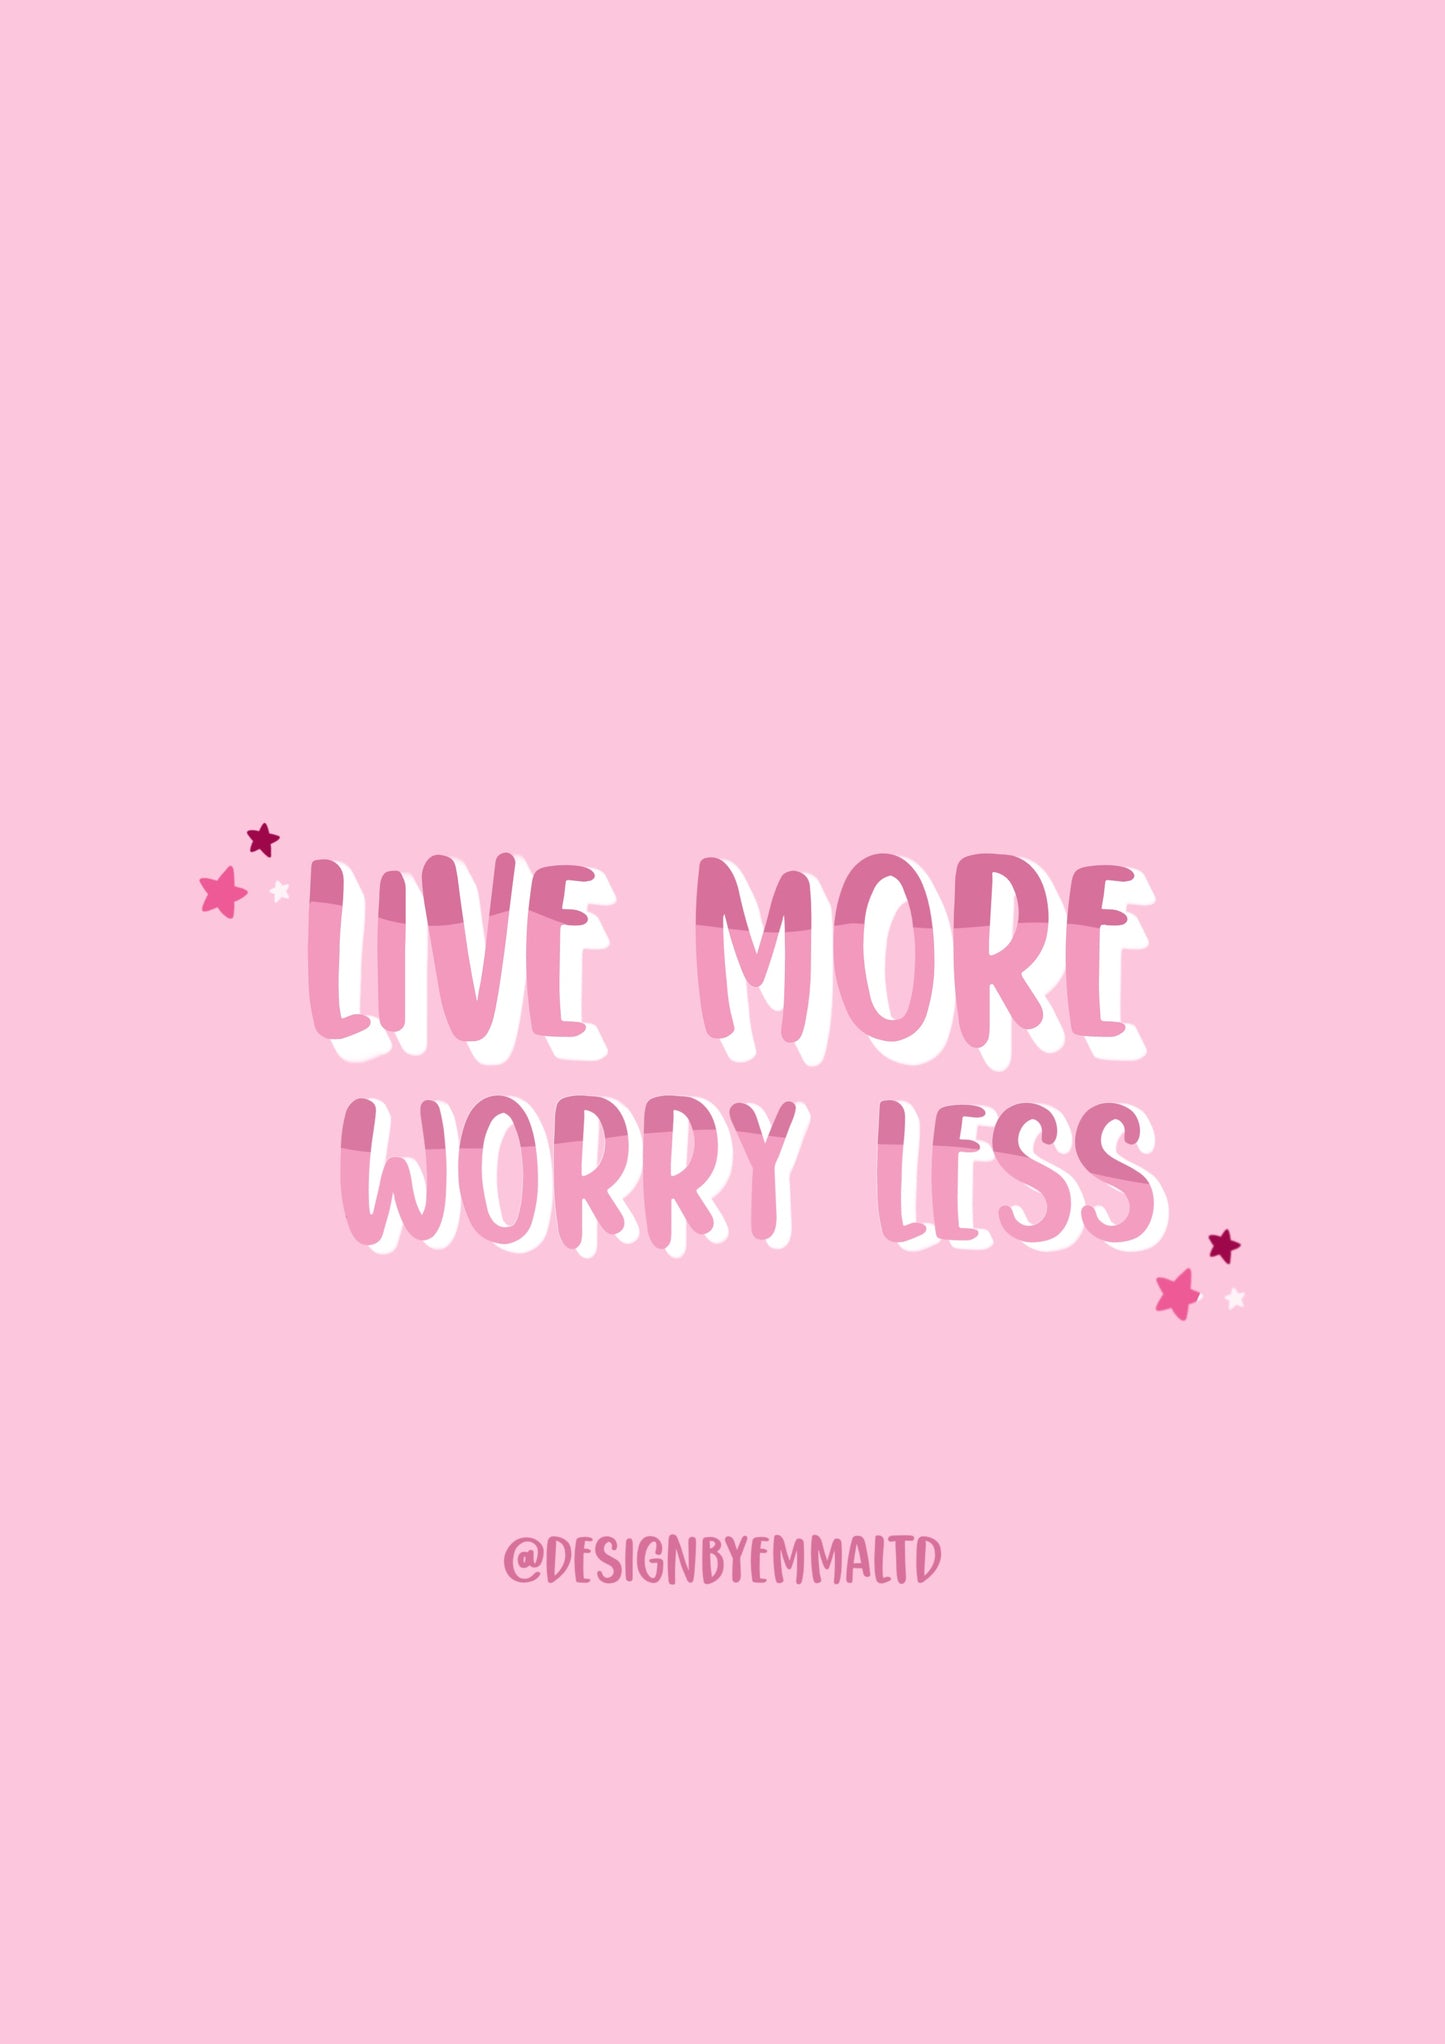 Live More, Worry Less Motivational Quote Wall art Postcard Print